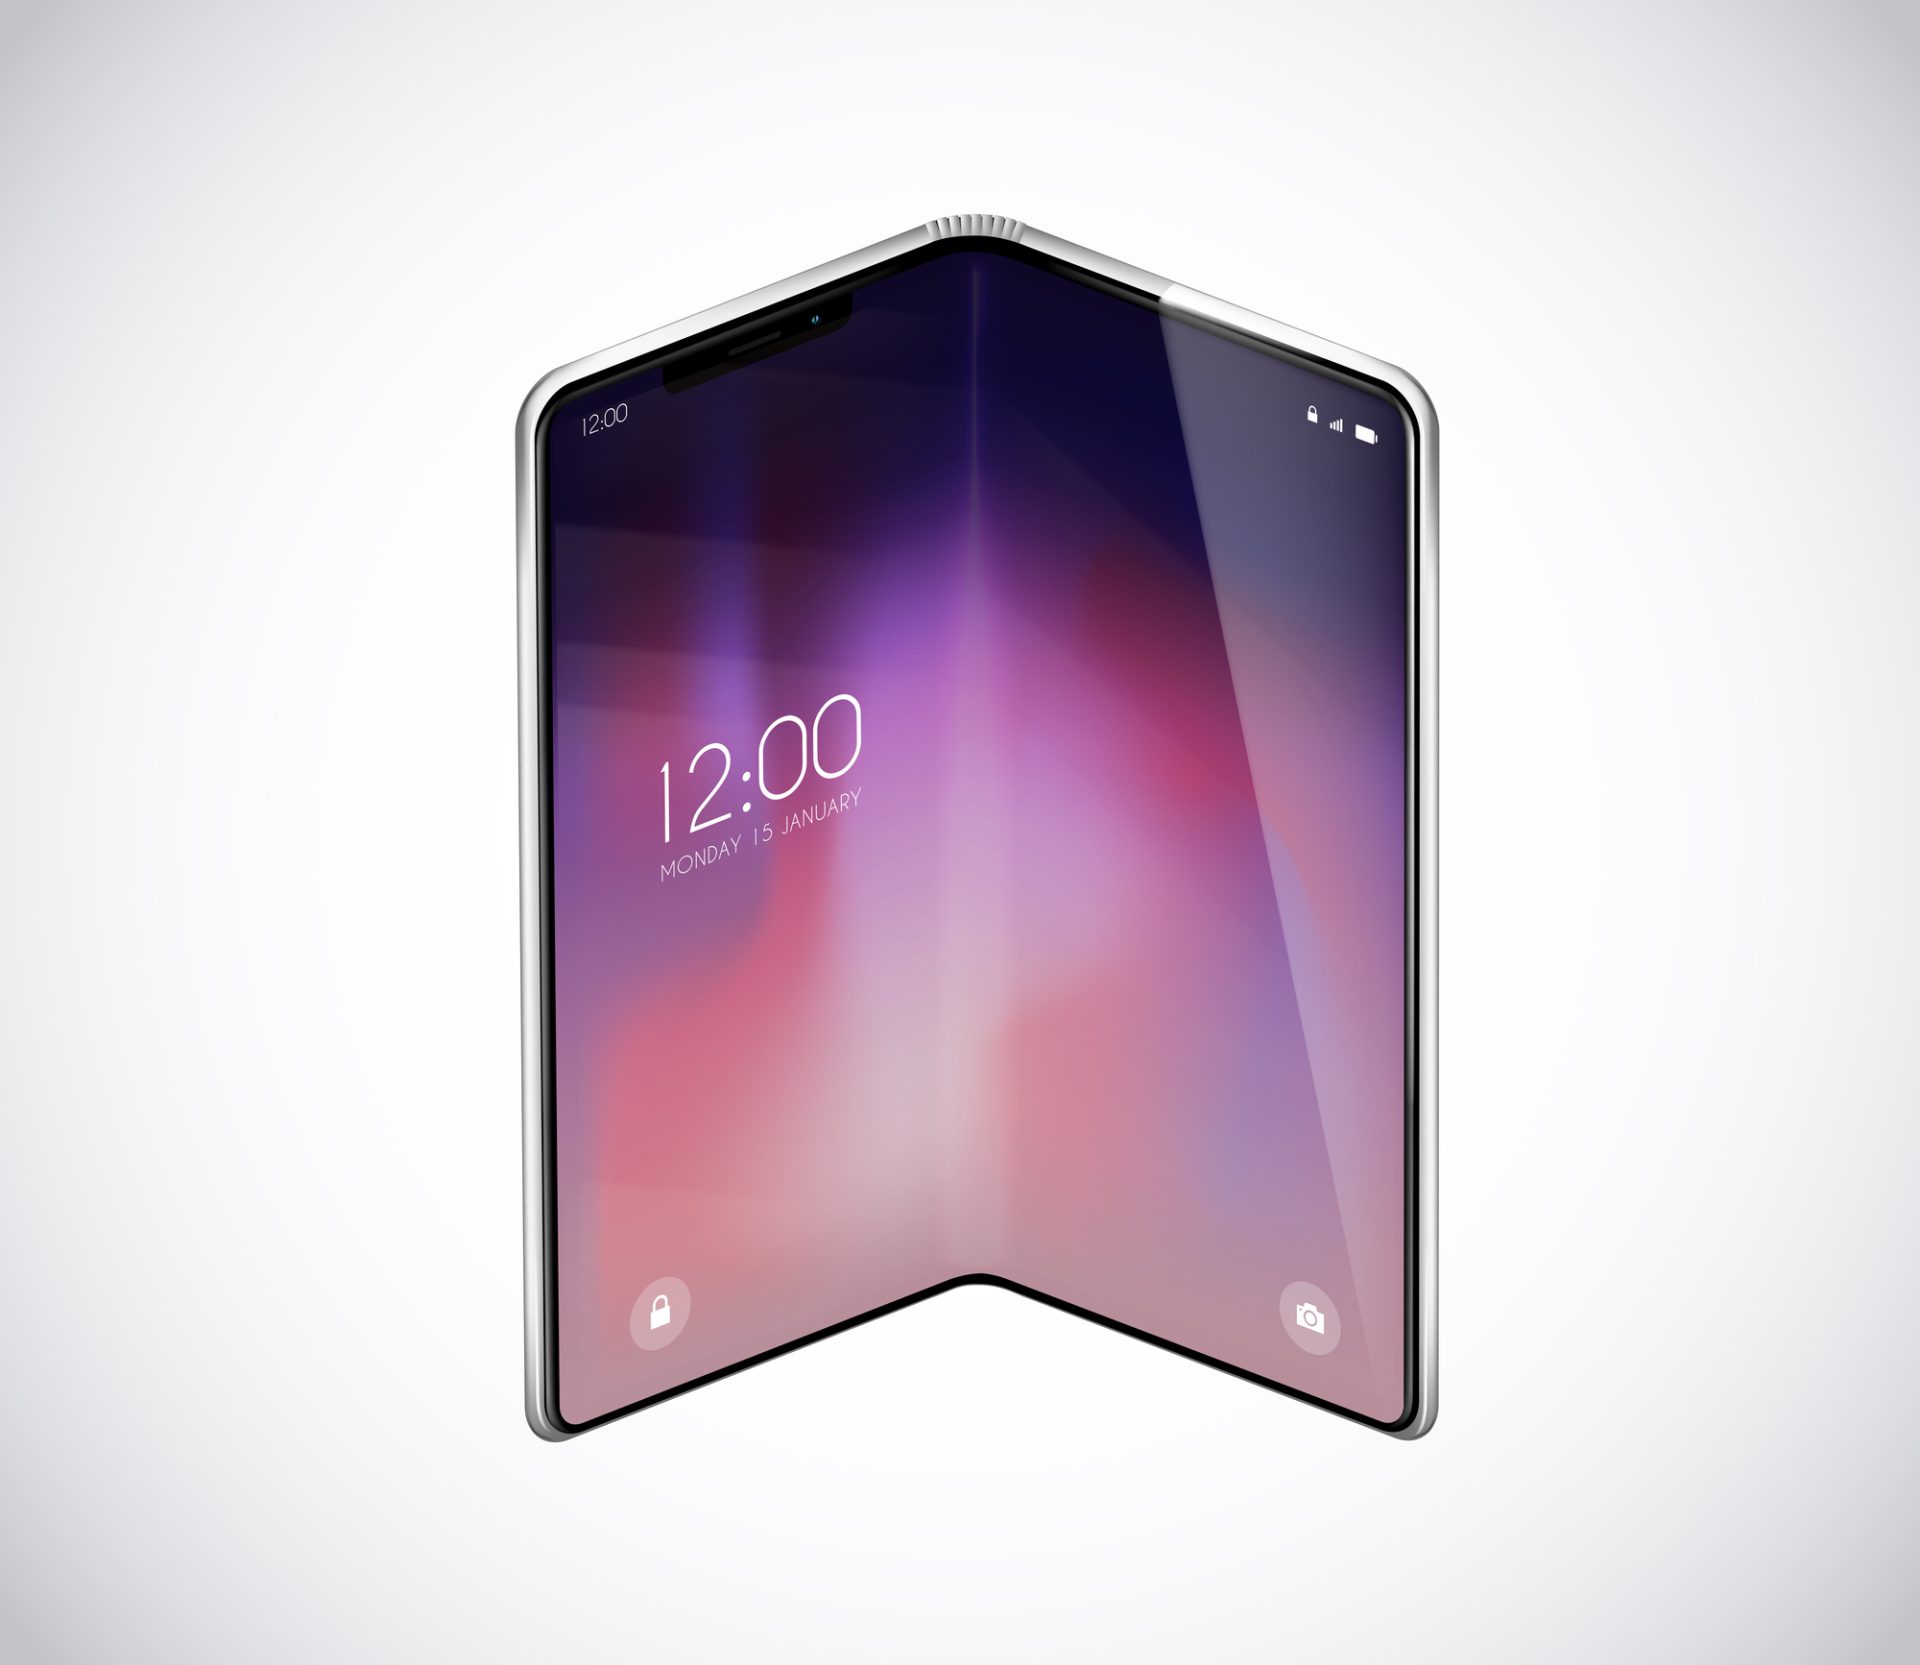 New Foldable Smartphone Concept, Prototype With Advertisment Bac